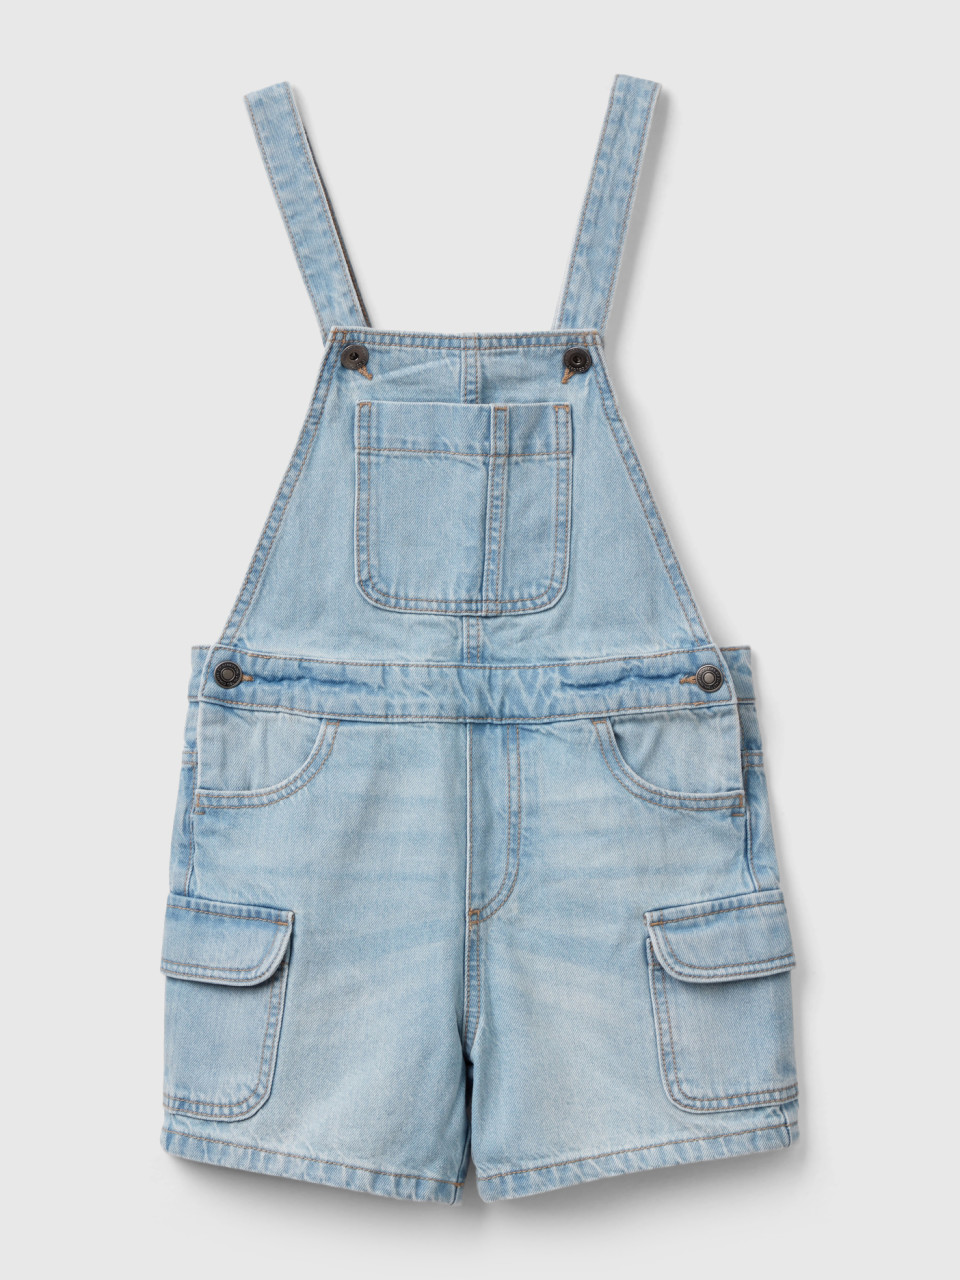 Benetton, Denim Dungarees With Pockets, Sky Blue, Kids